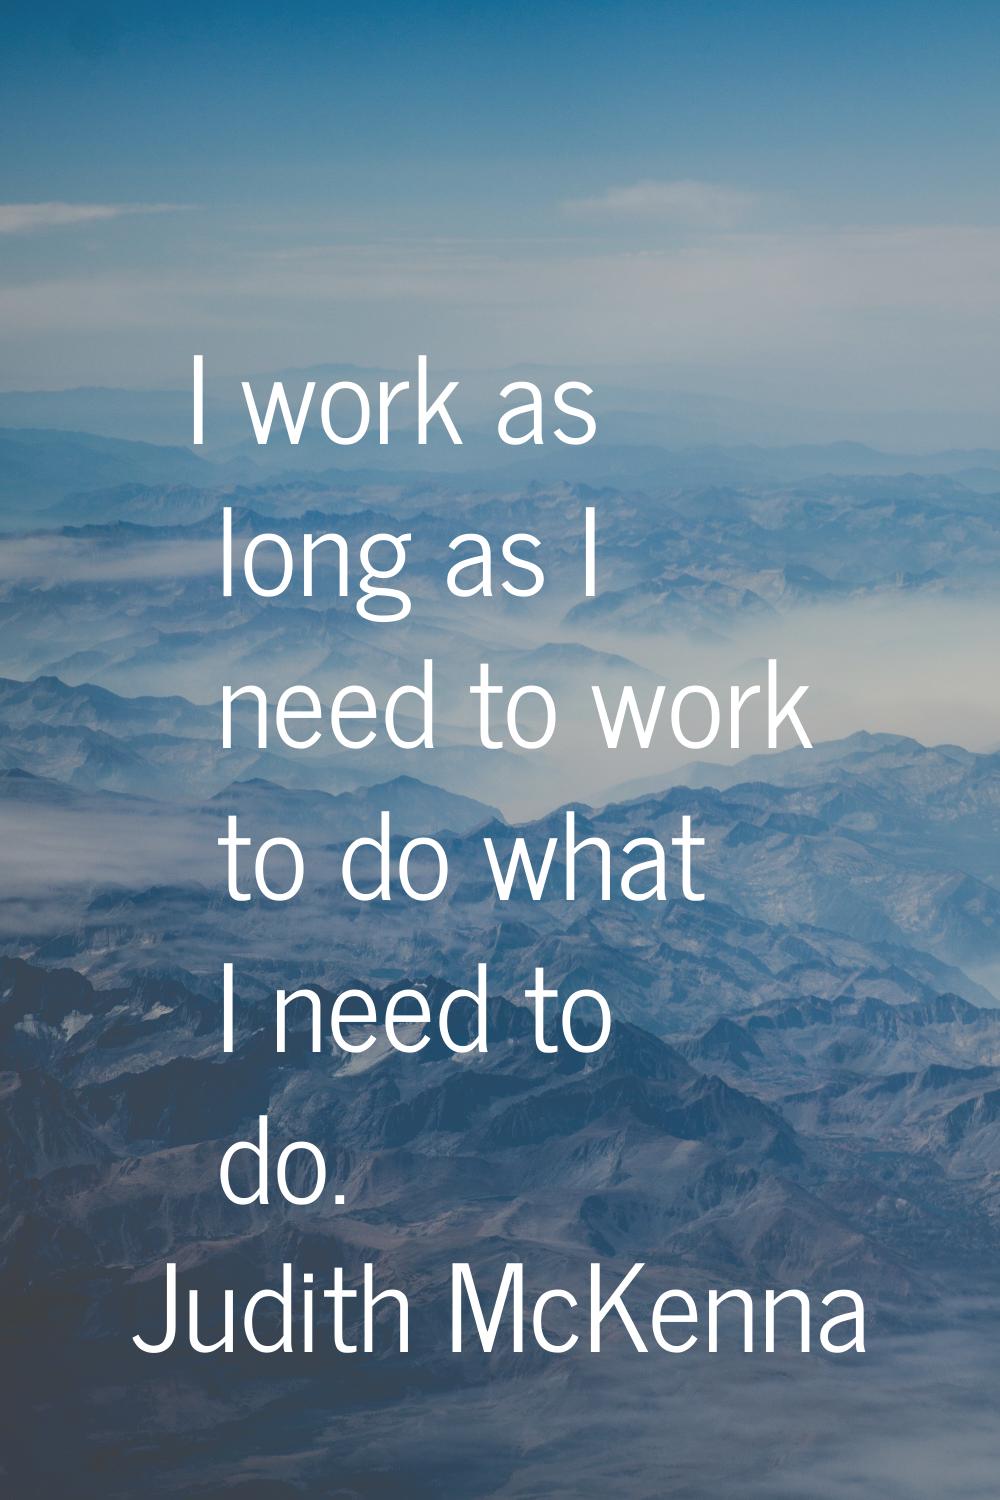 I work as long as I need to work to do what I need to do.